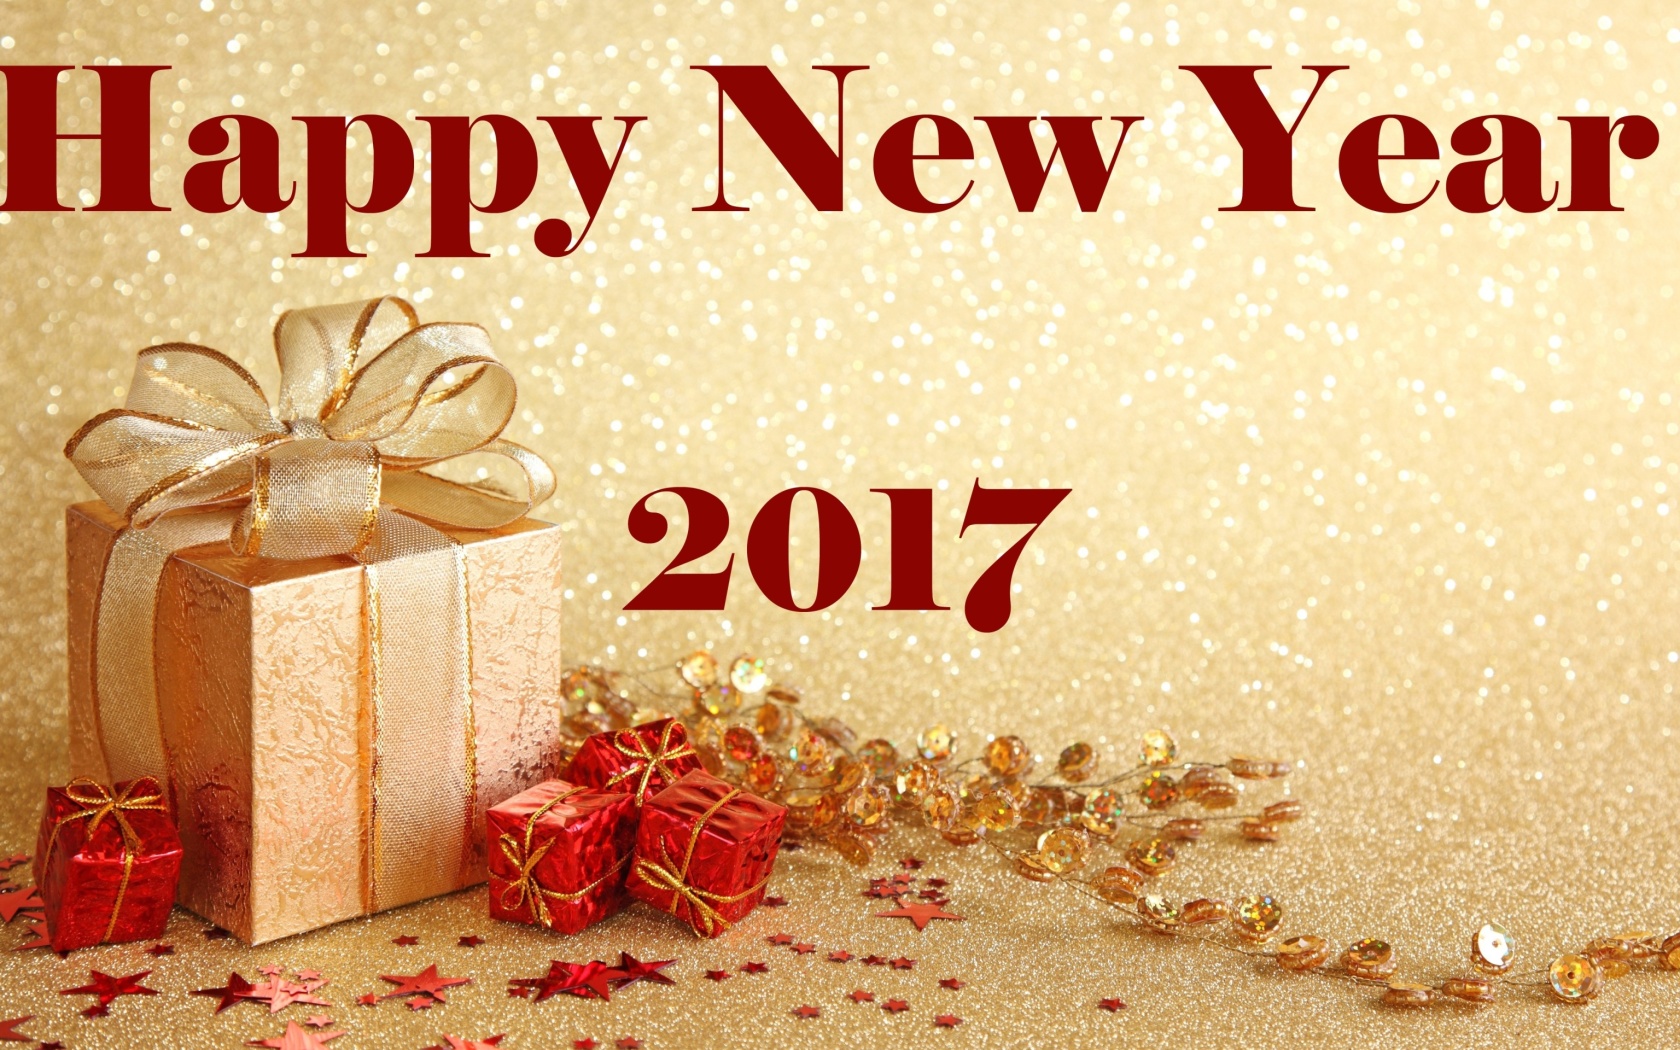 Happy New Year 2017 with Gifts wallpaper 1680x1050